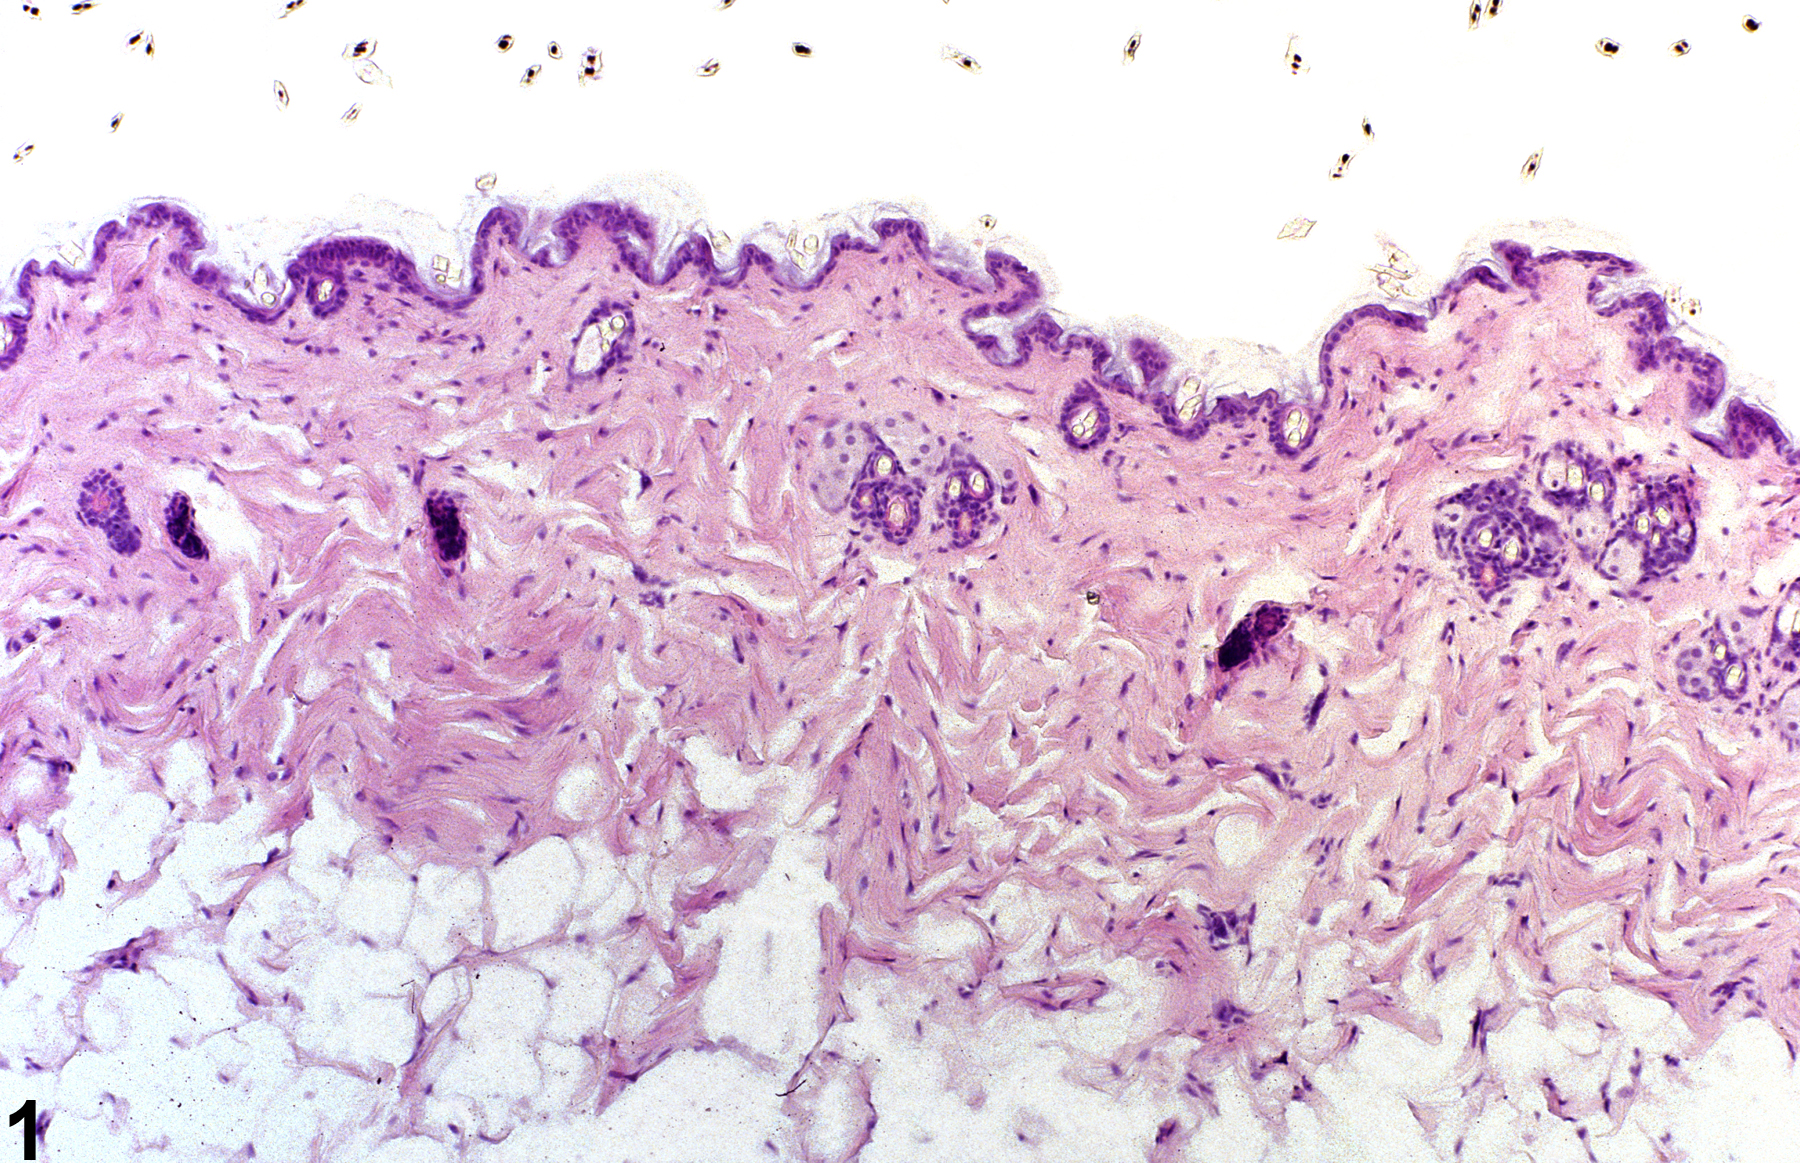 Image of Hyperplasia (normal comparison) in the Skin from a Male B6C3F1 Mouse in a 90-day  Study